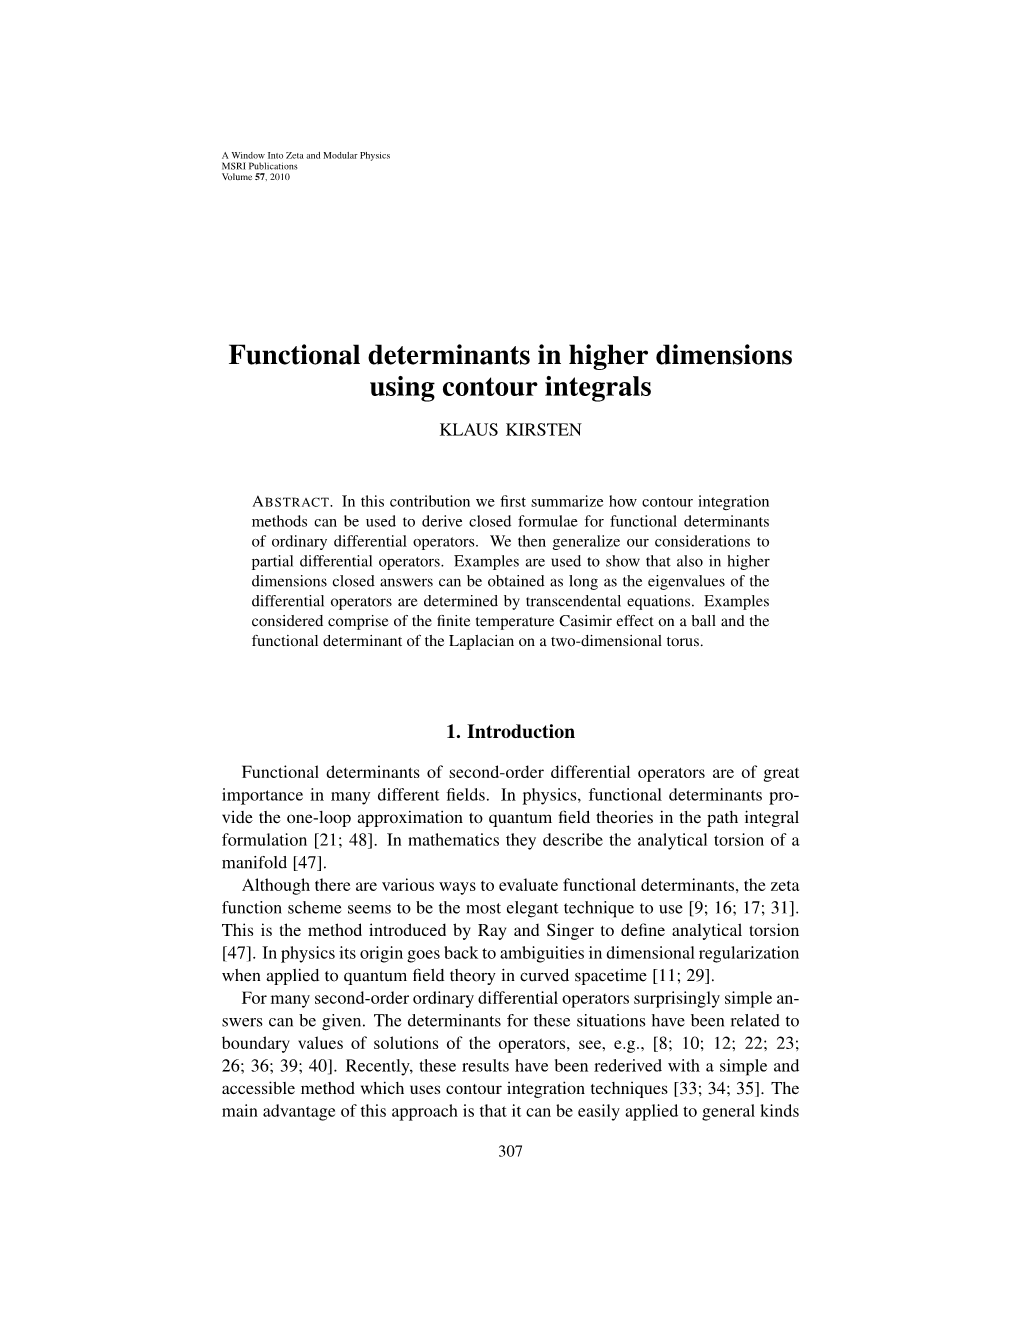 Functional Determinants in Higher Dimensions Using Contour Integrals